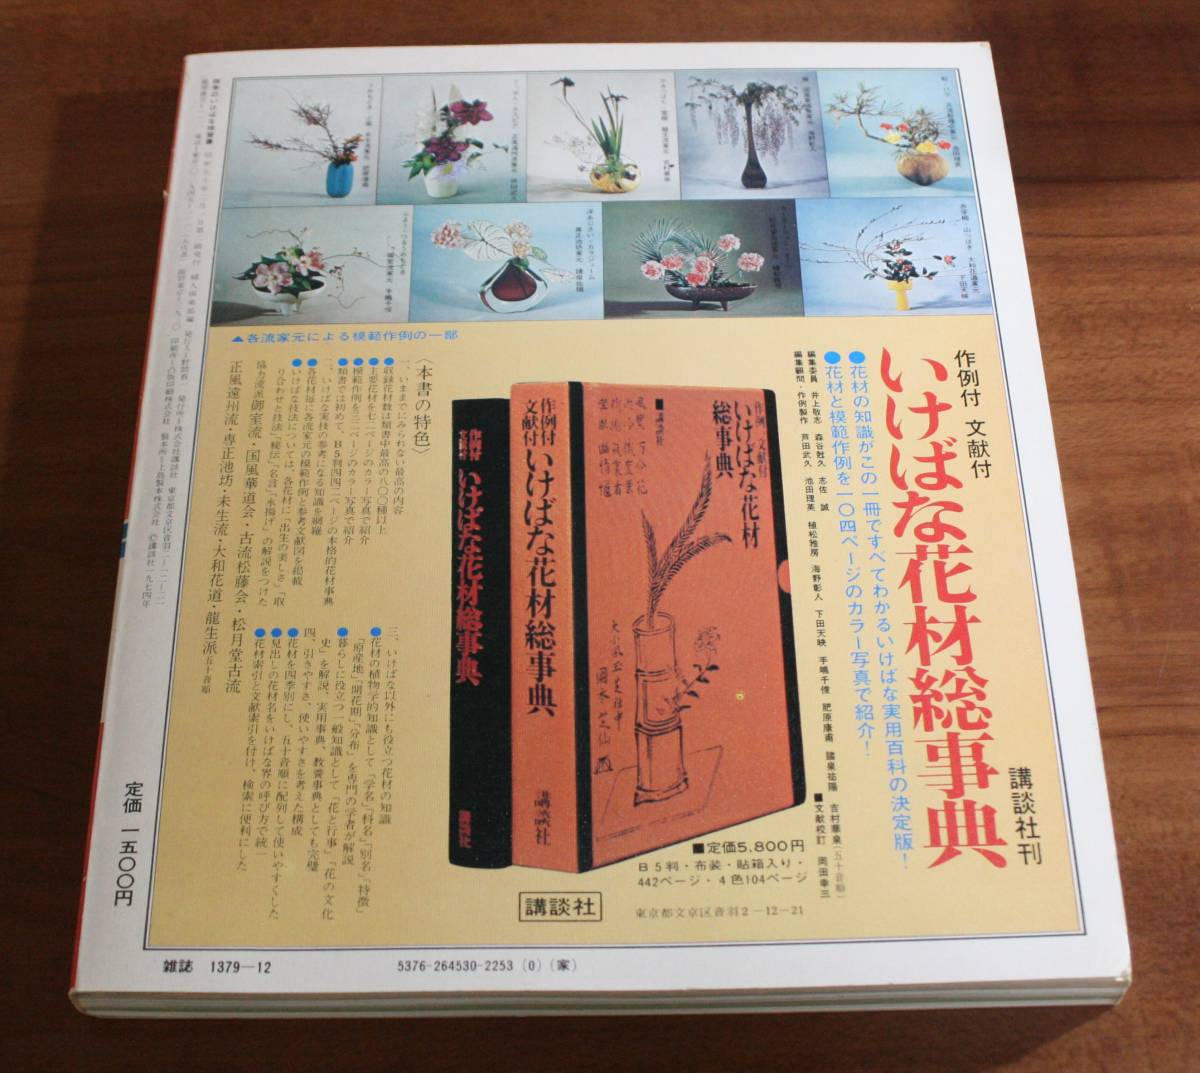 *73* four season. ...... paper woman club compilation cover island rice field .. secondhand book *